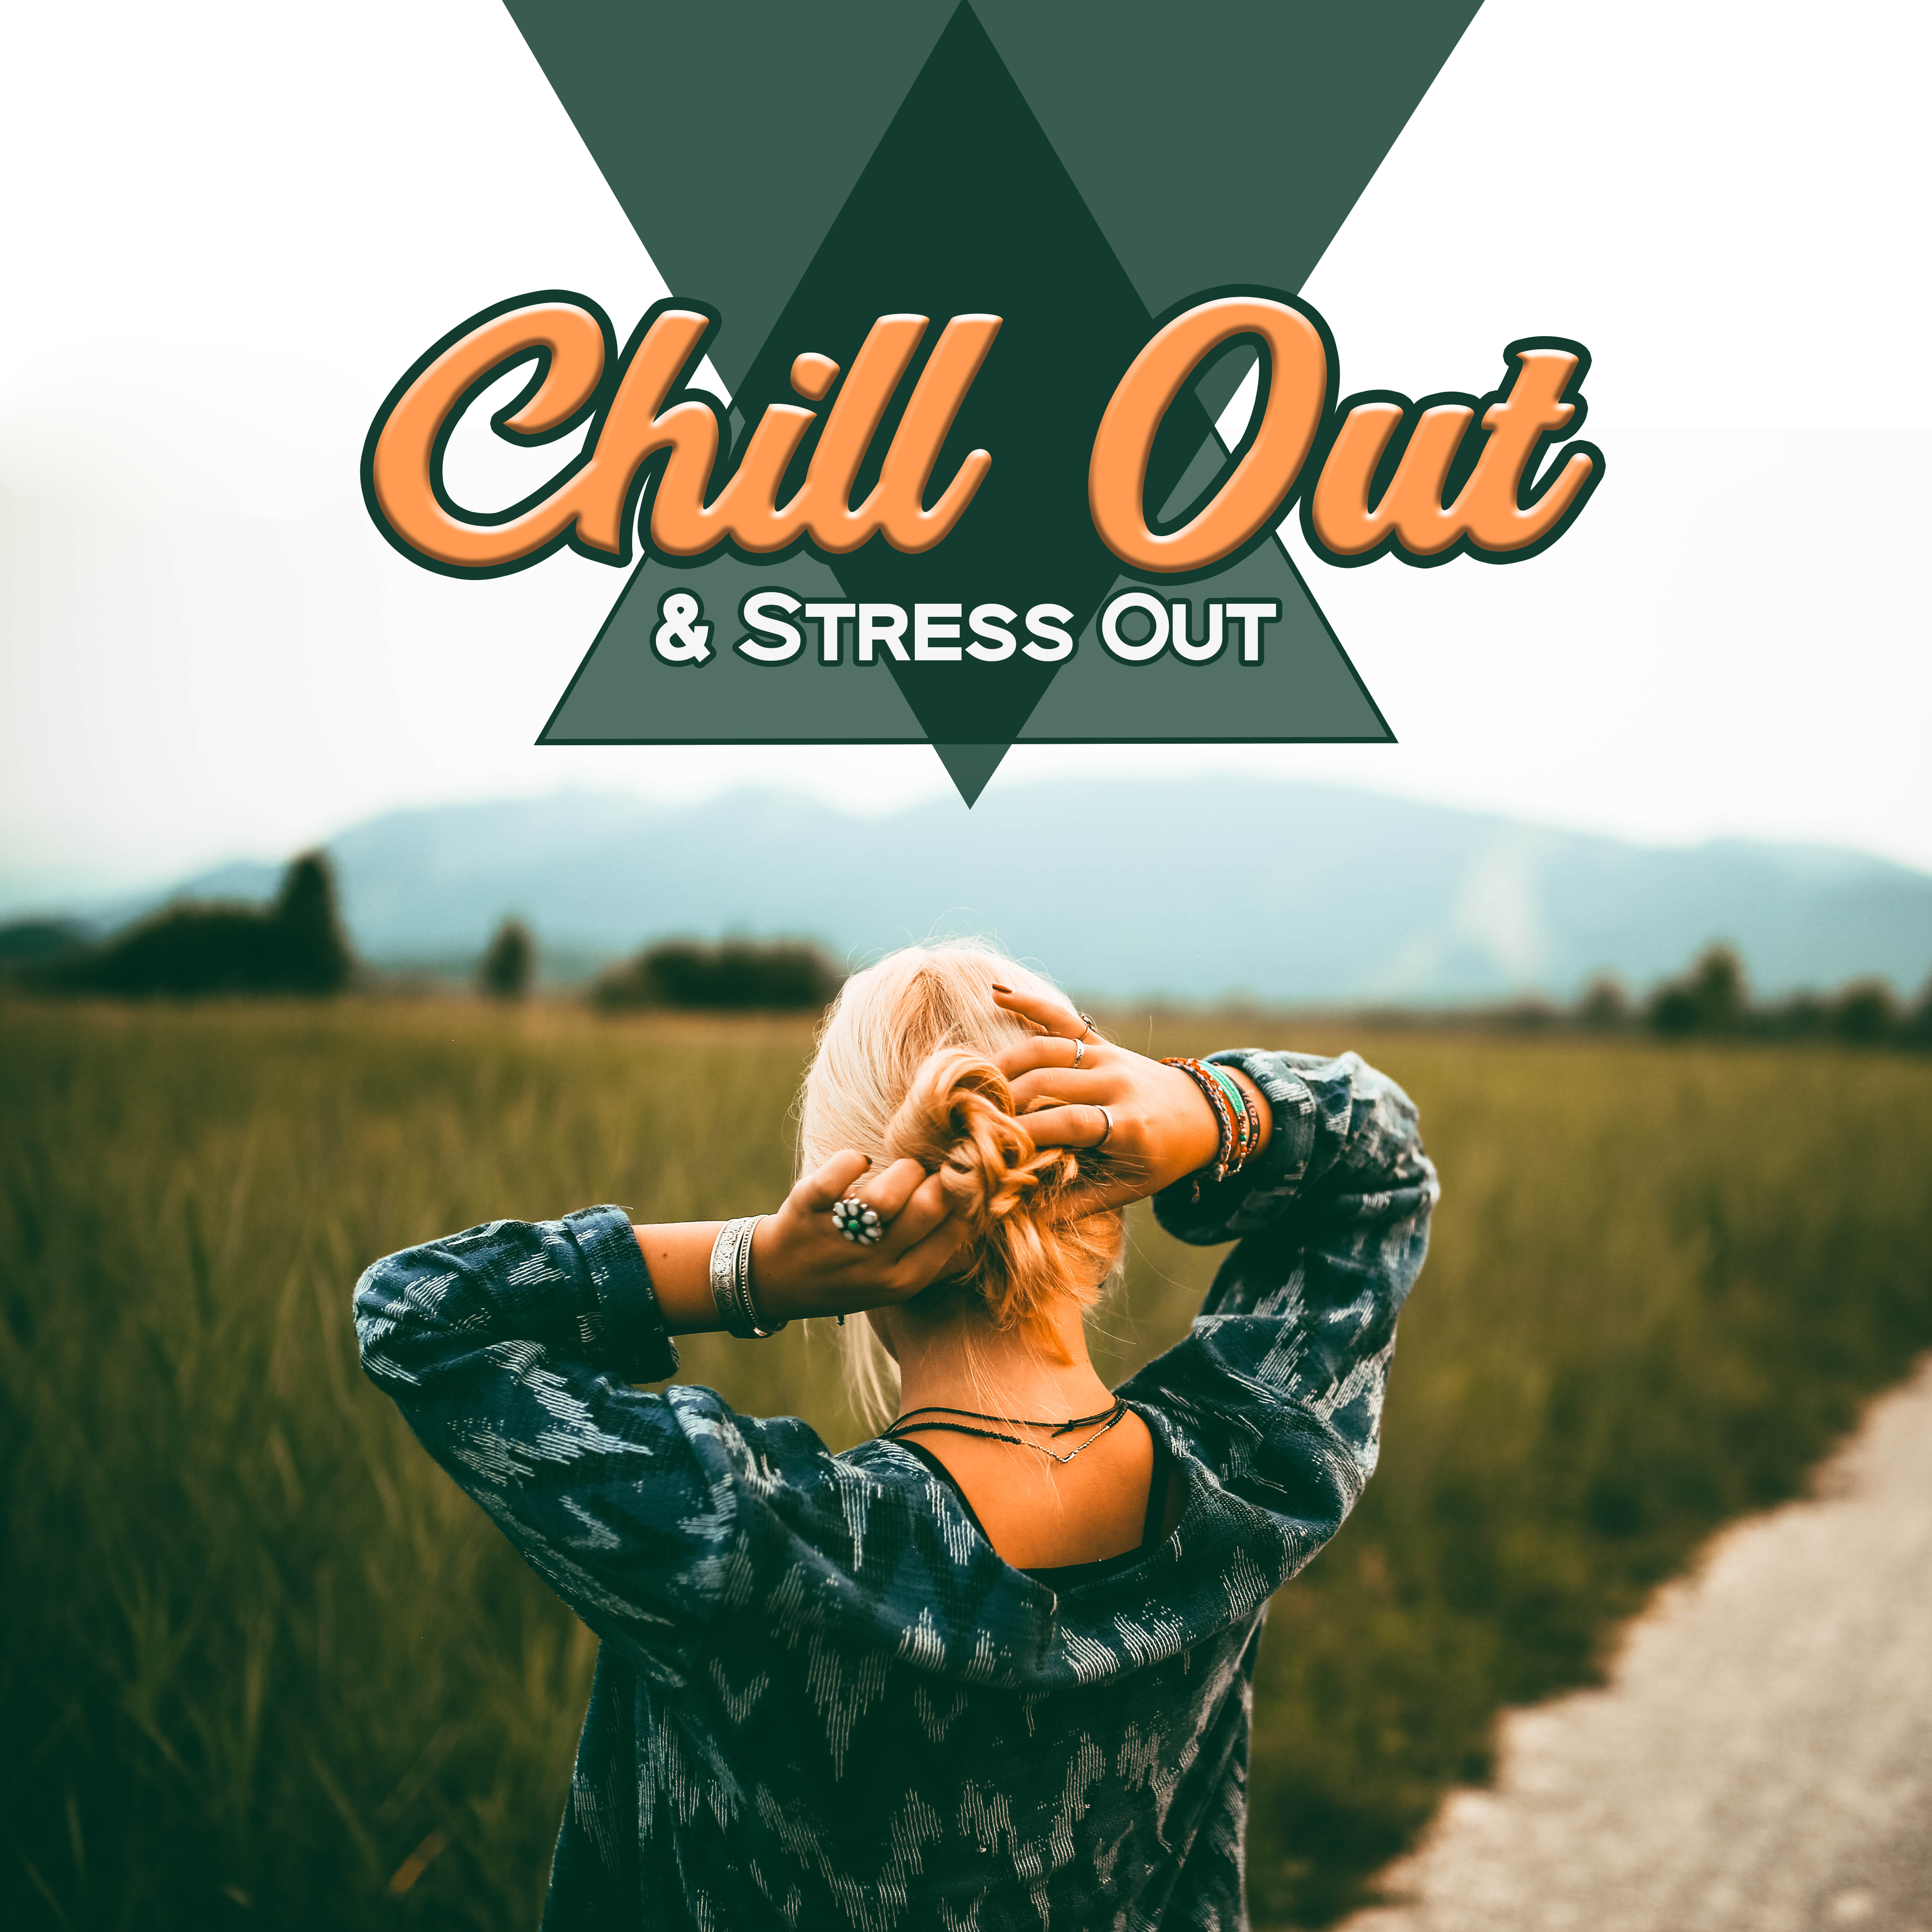 Chill Out & Stress Out – Chill Out Music, Deep Relaxation, Relief Stress, Rest